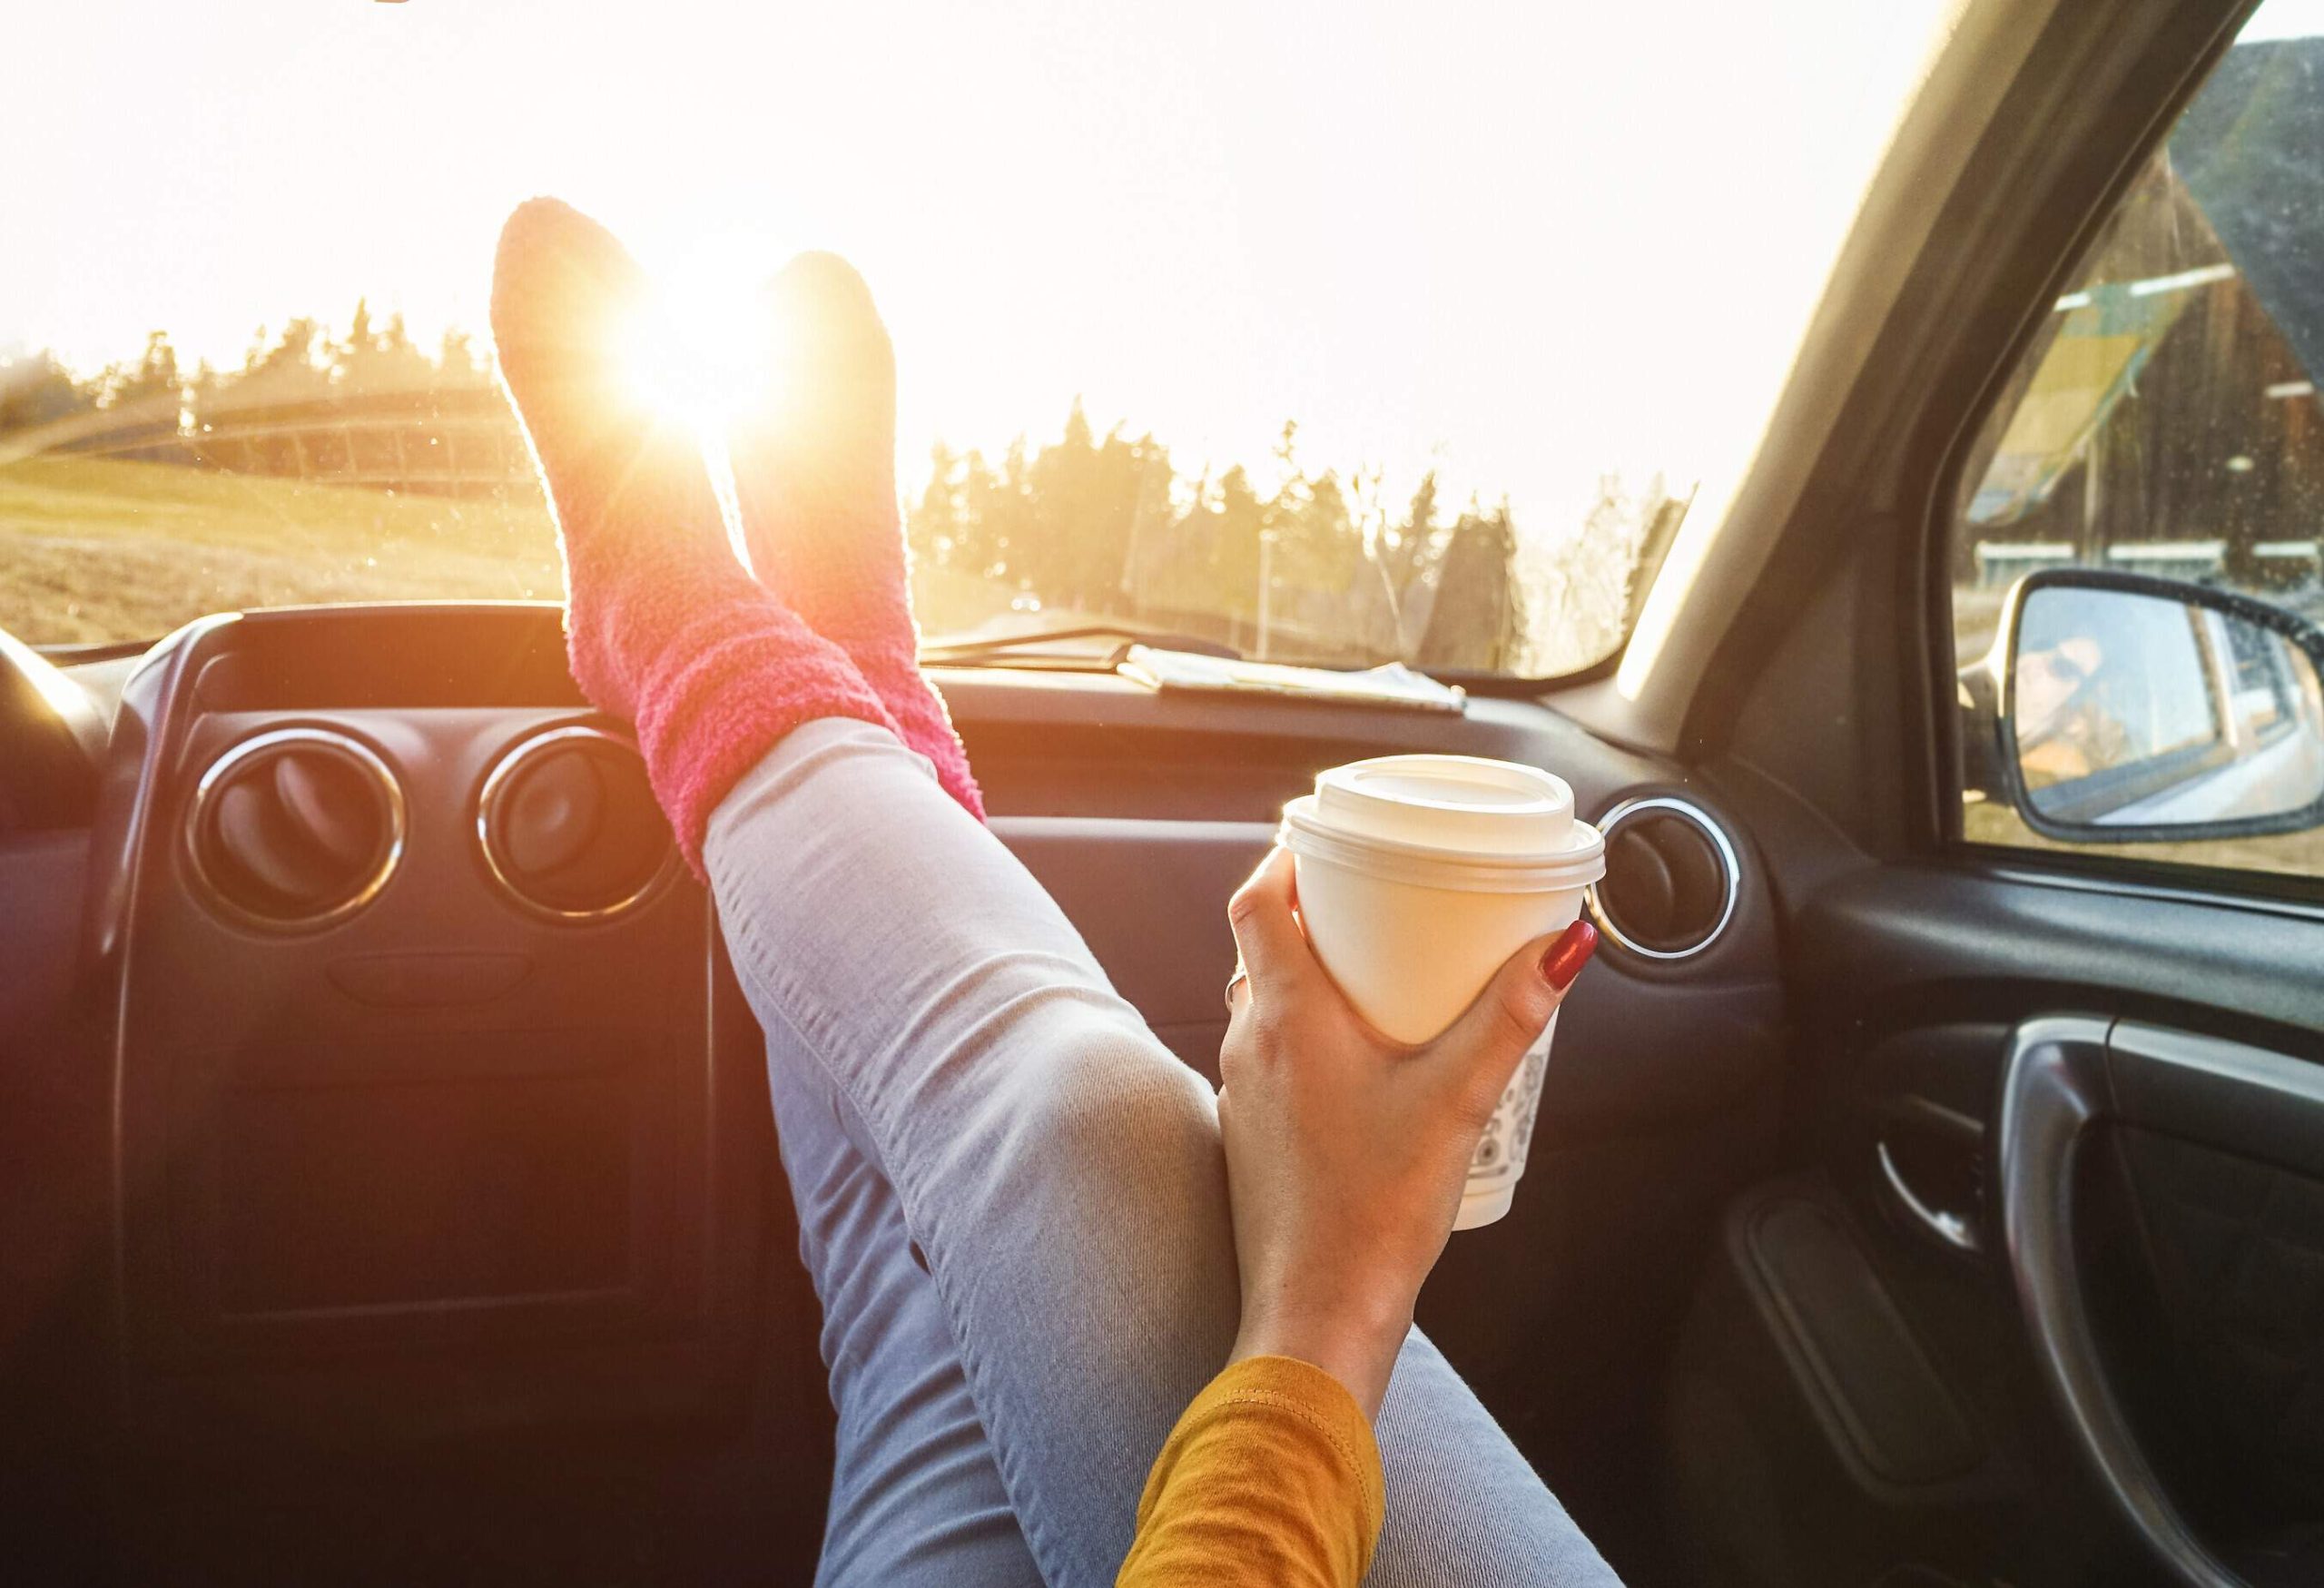 A woman sitting inside a car with a coffee cup in her hand, her sock-clad feet resting on the dashboard.